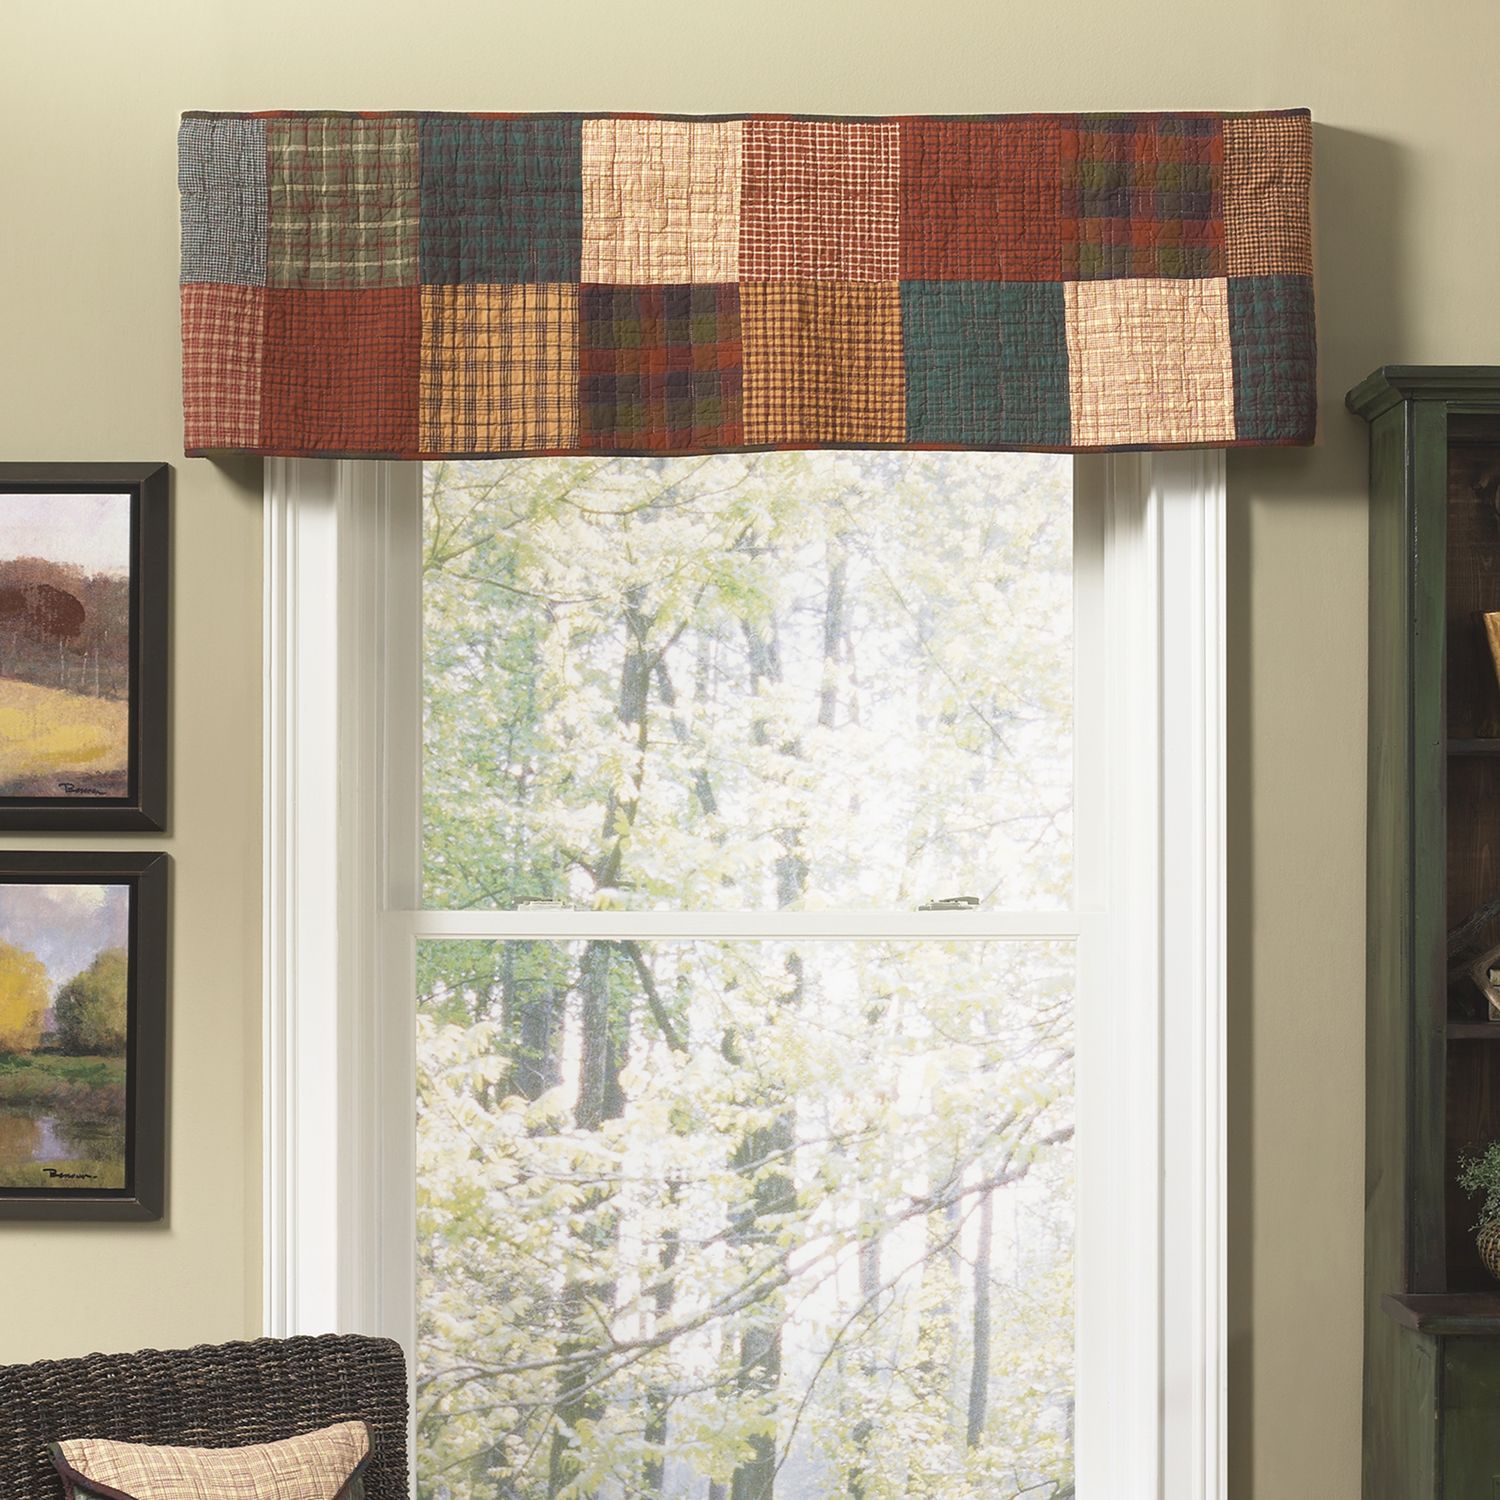 Image for Donna Sharp Campfire Square Window Valance at Kohl's.